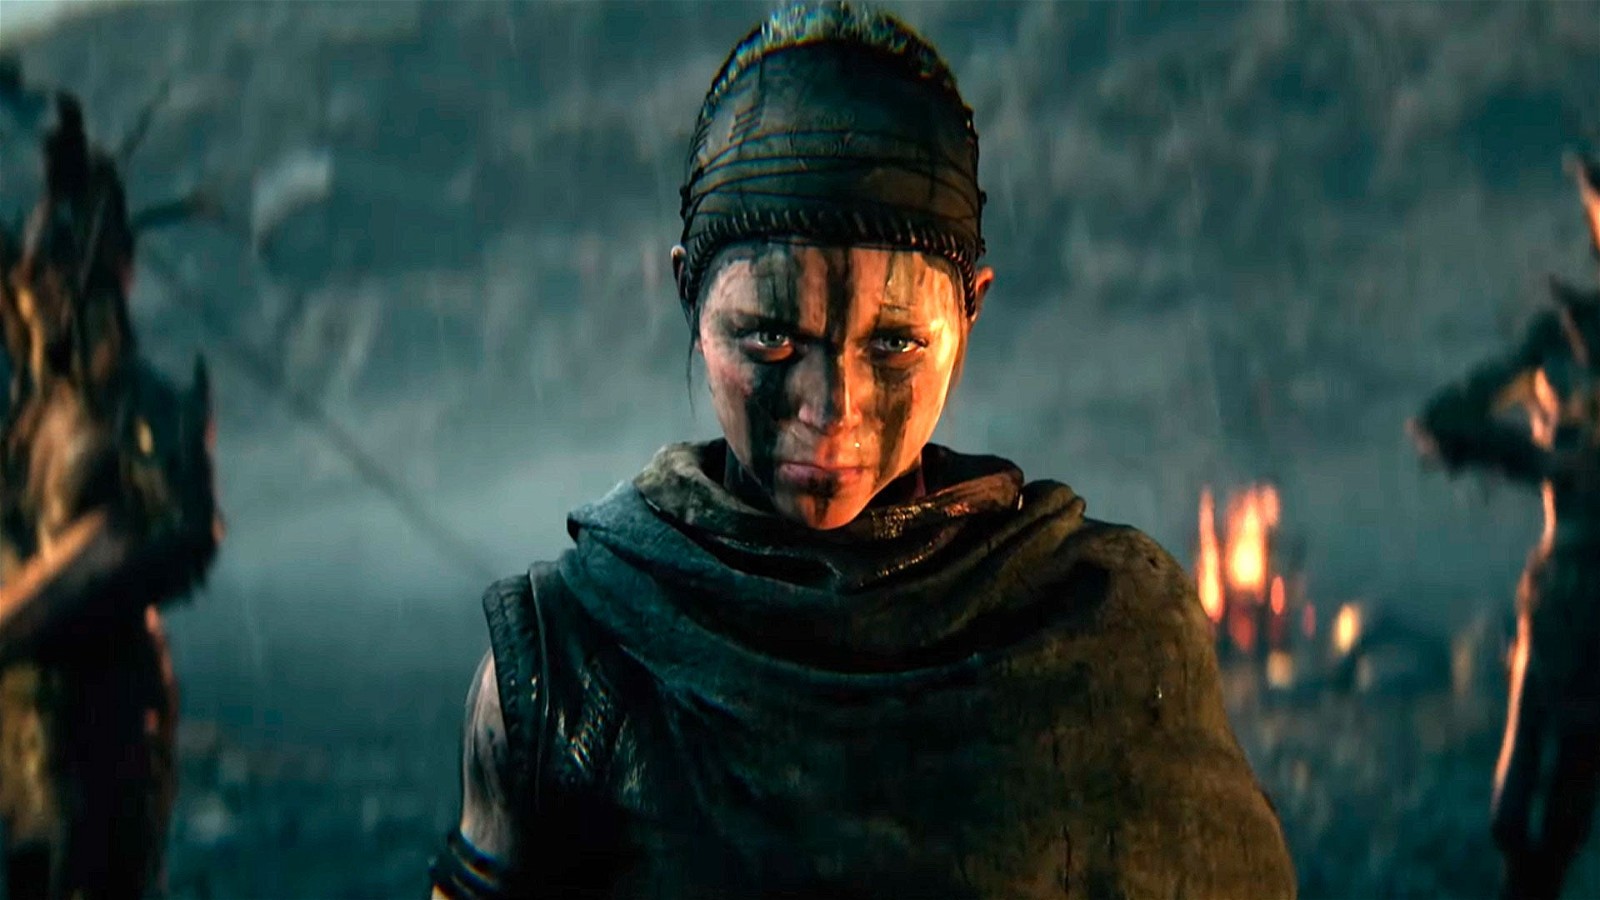 Senua's costumes were developed by expert craftspeople, using techniques authentic to the game's era.